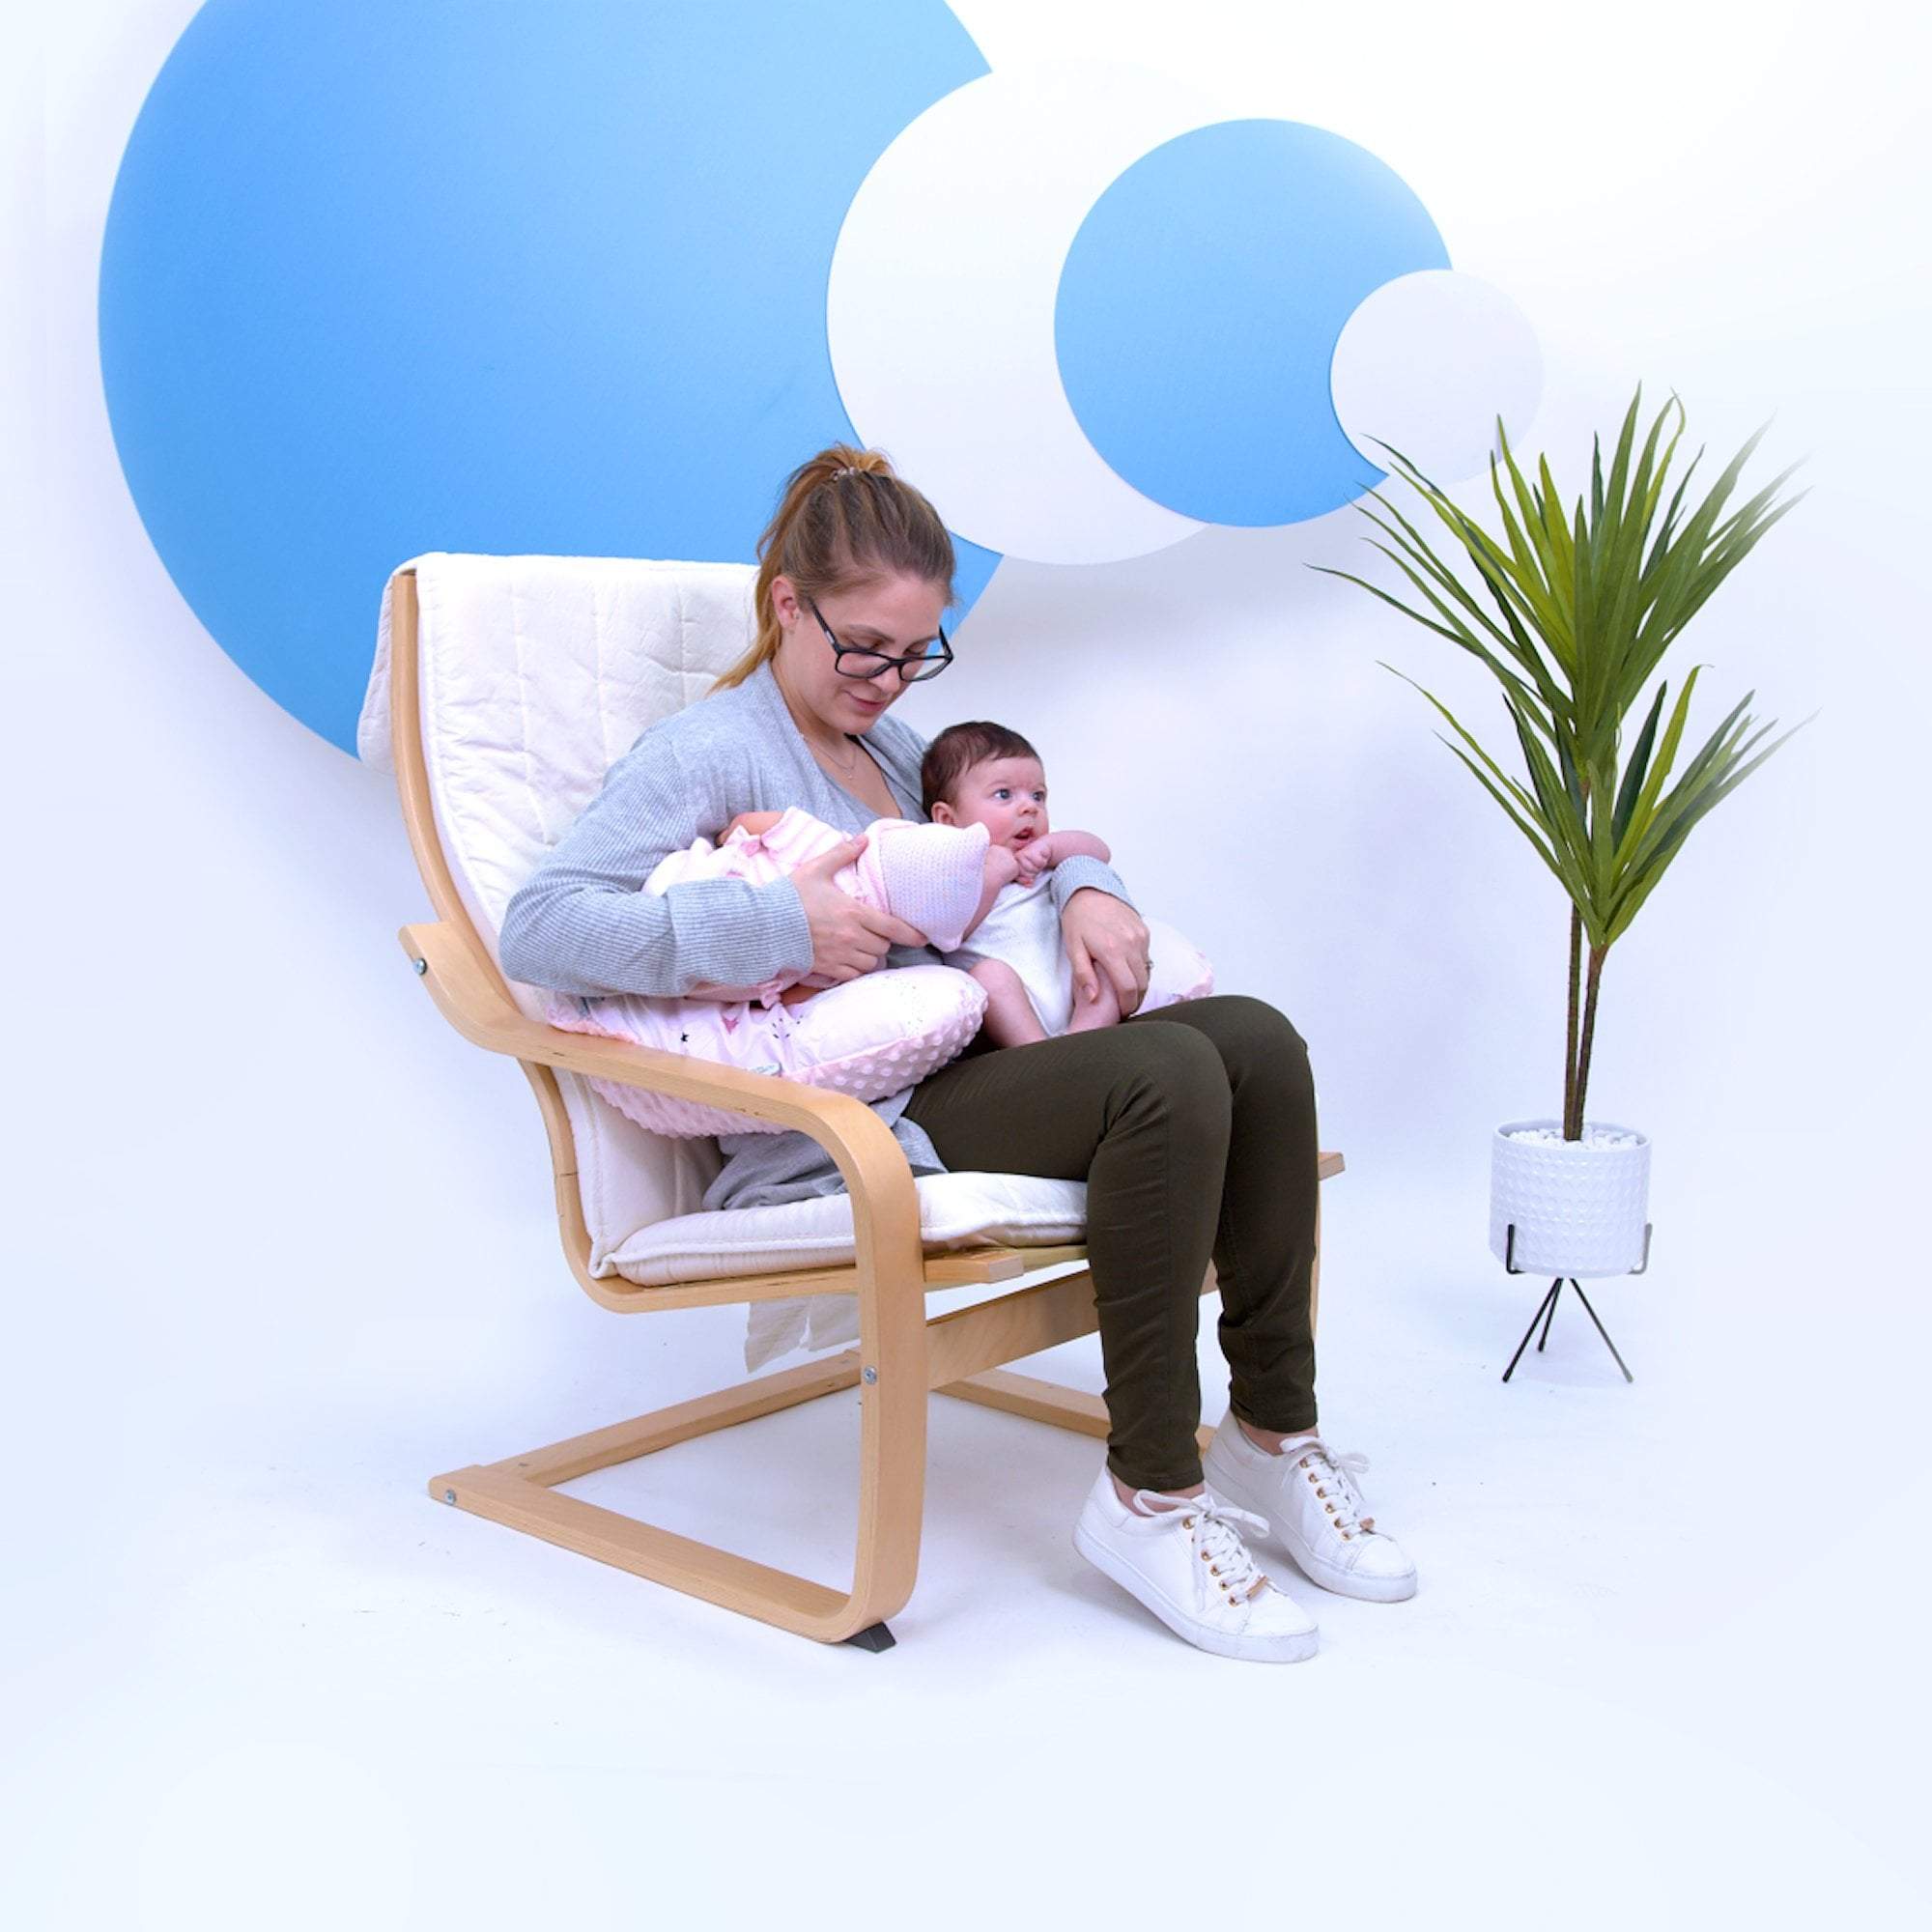 Twin Pregnancy Nursing Pillow - Pixie -  | For Your Little One